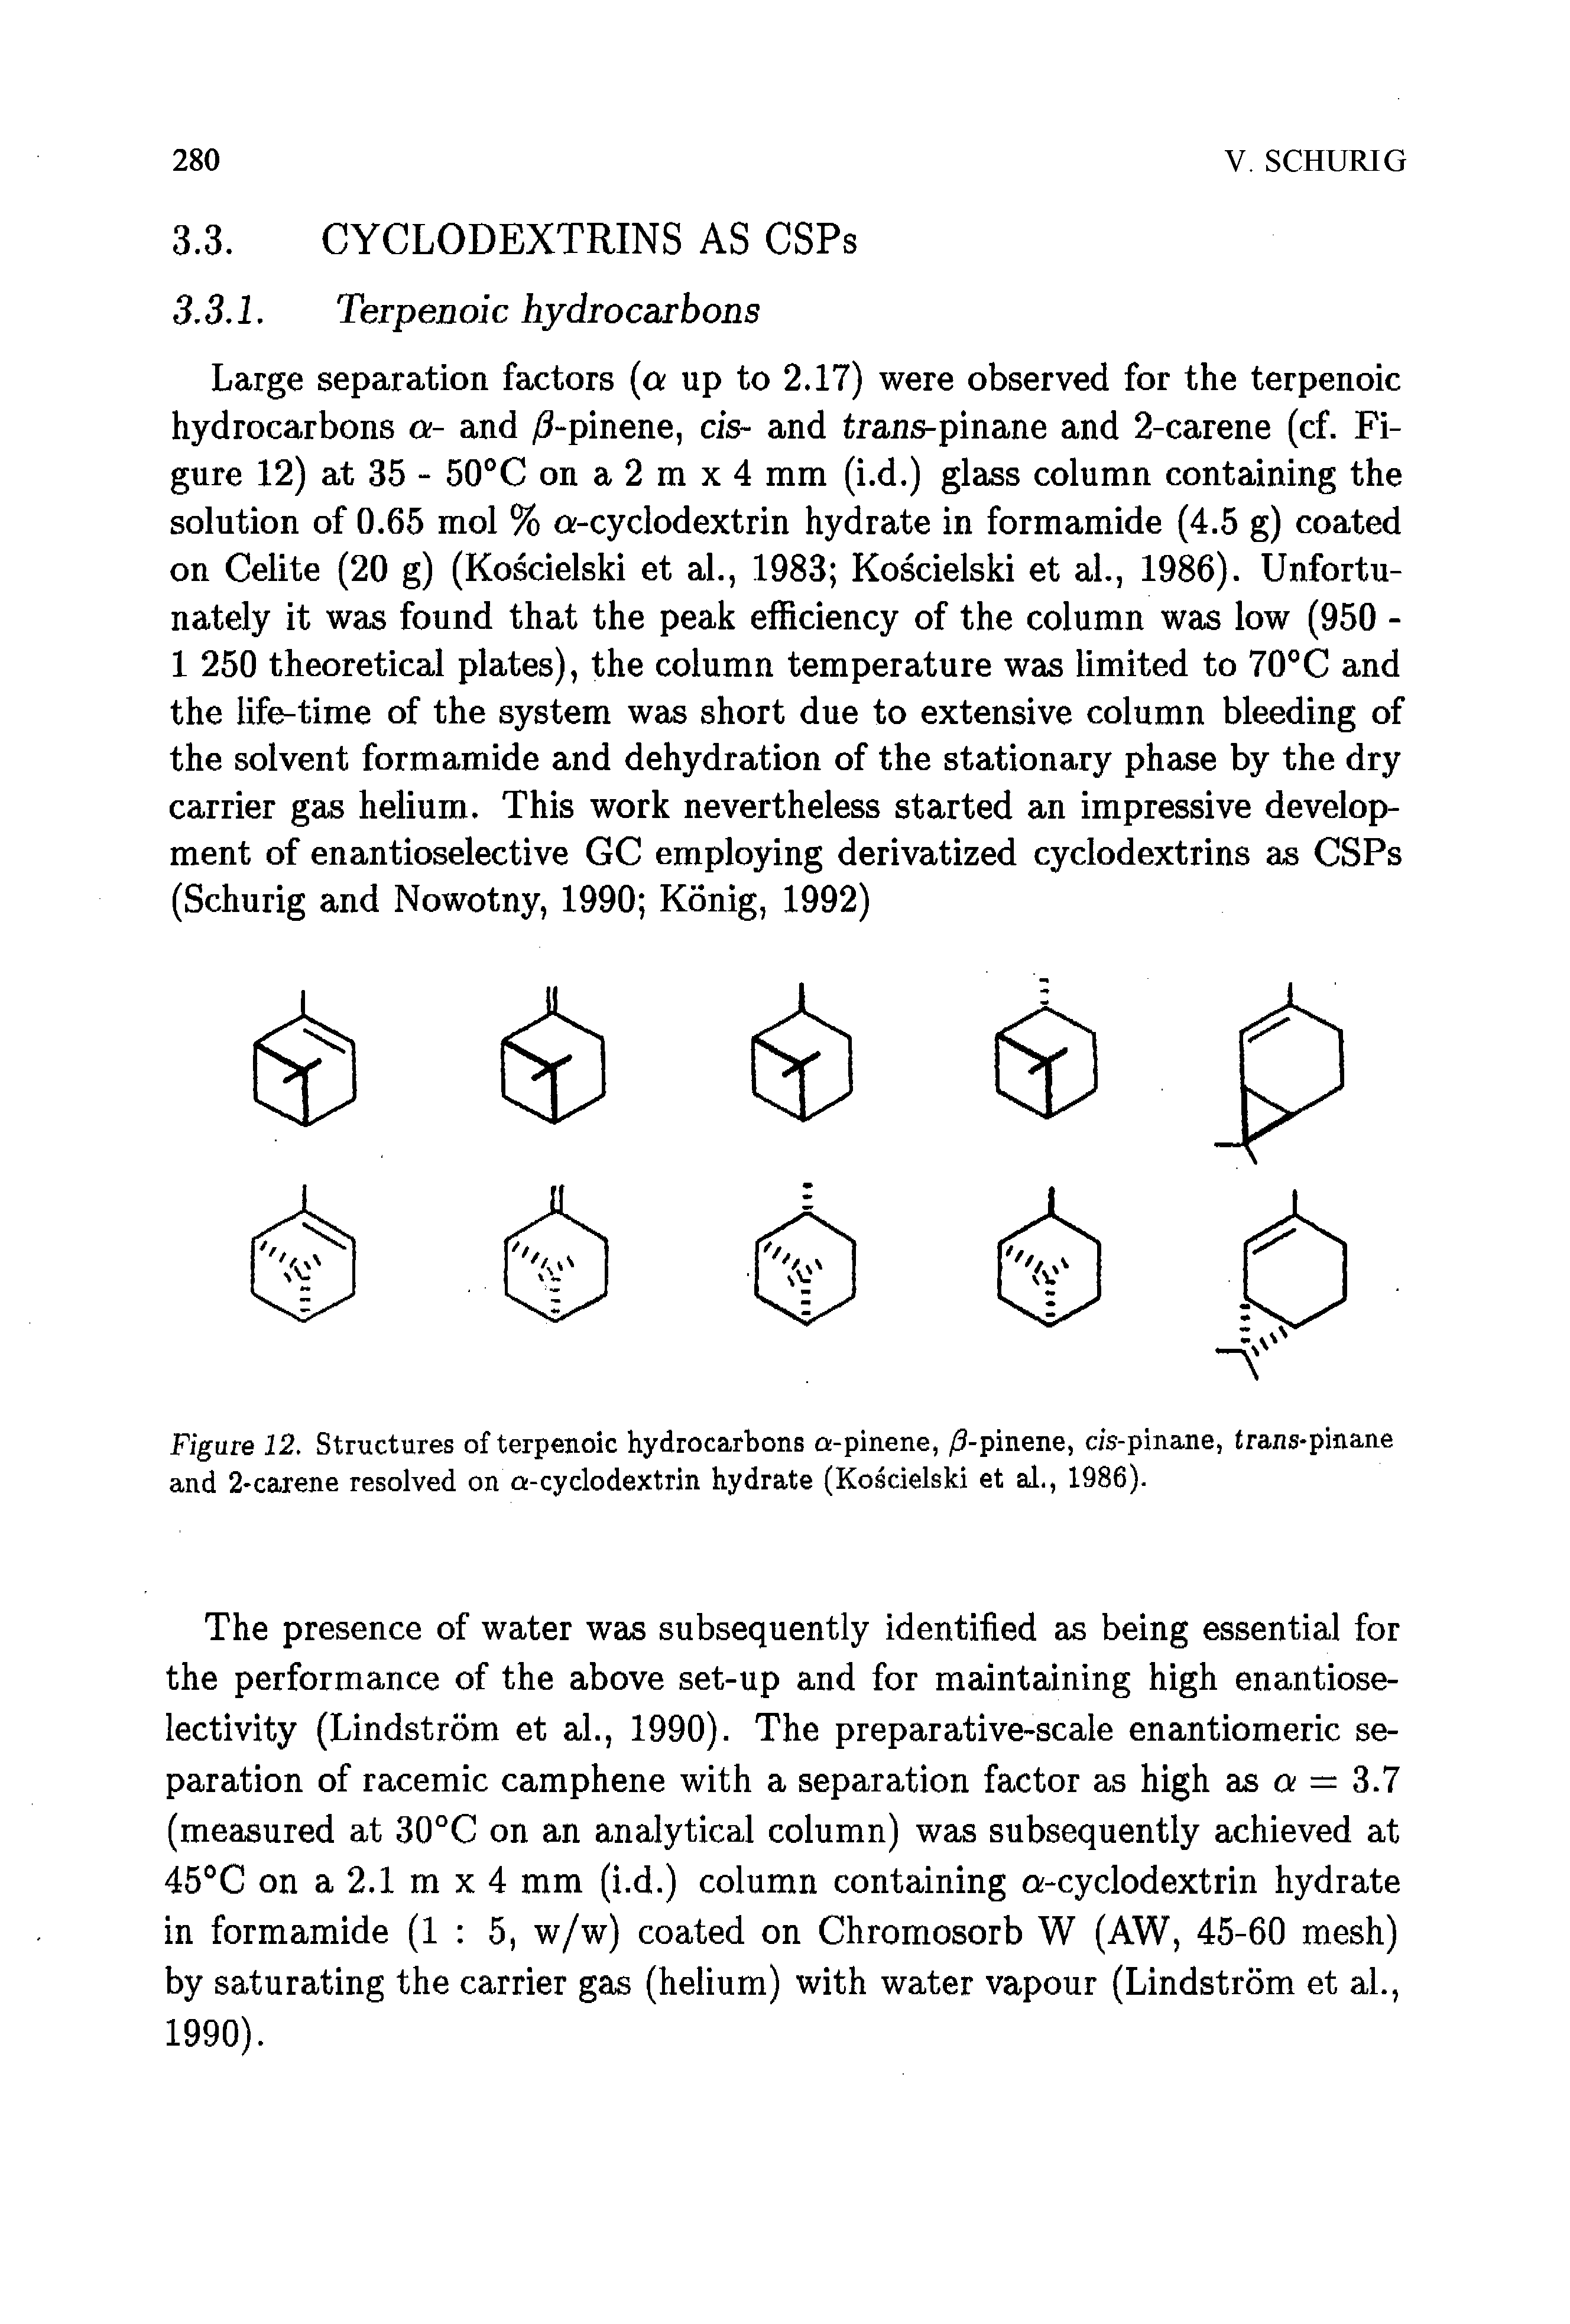 Figure 12. Structures of terpenoic hydrocarbons a-pinene, /3-pinene, cis-pinane, trans-pinane and 2 carene resolved on a-cyclodextrin hydrate (Koscielski et al., 1986).